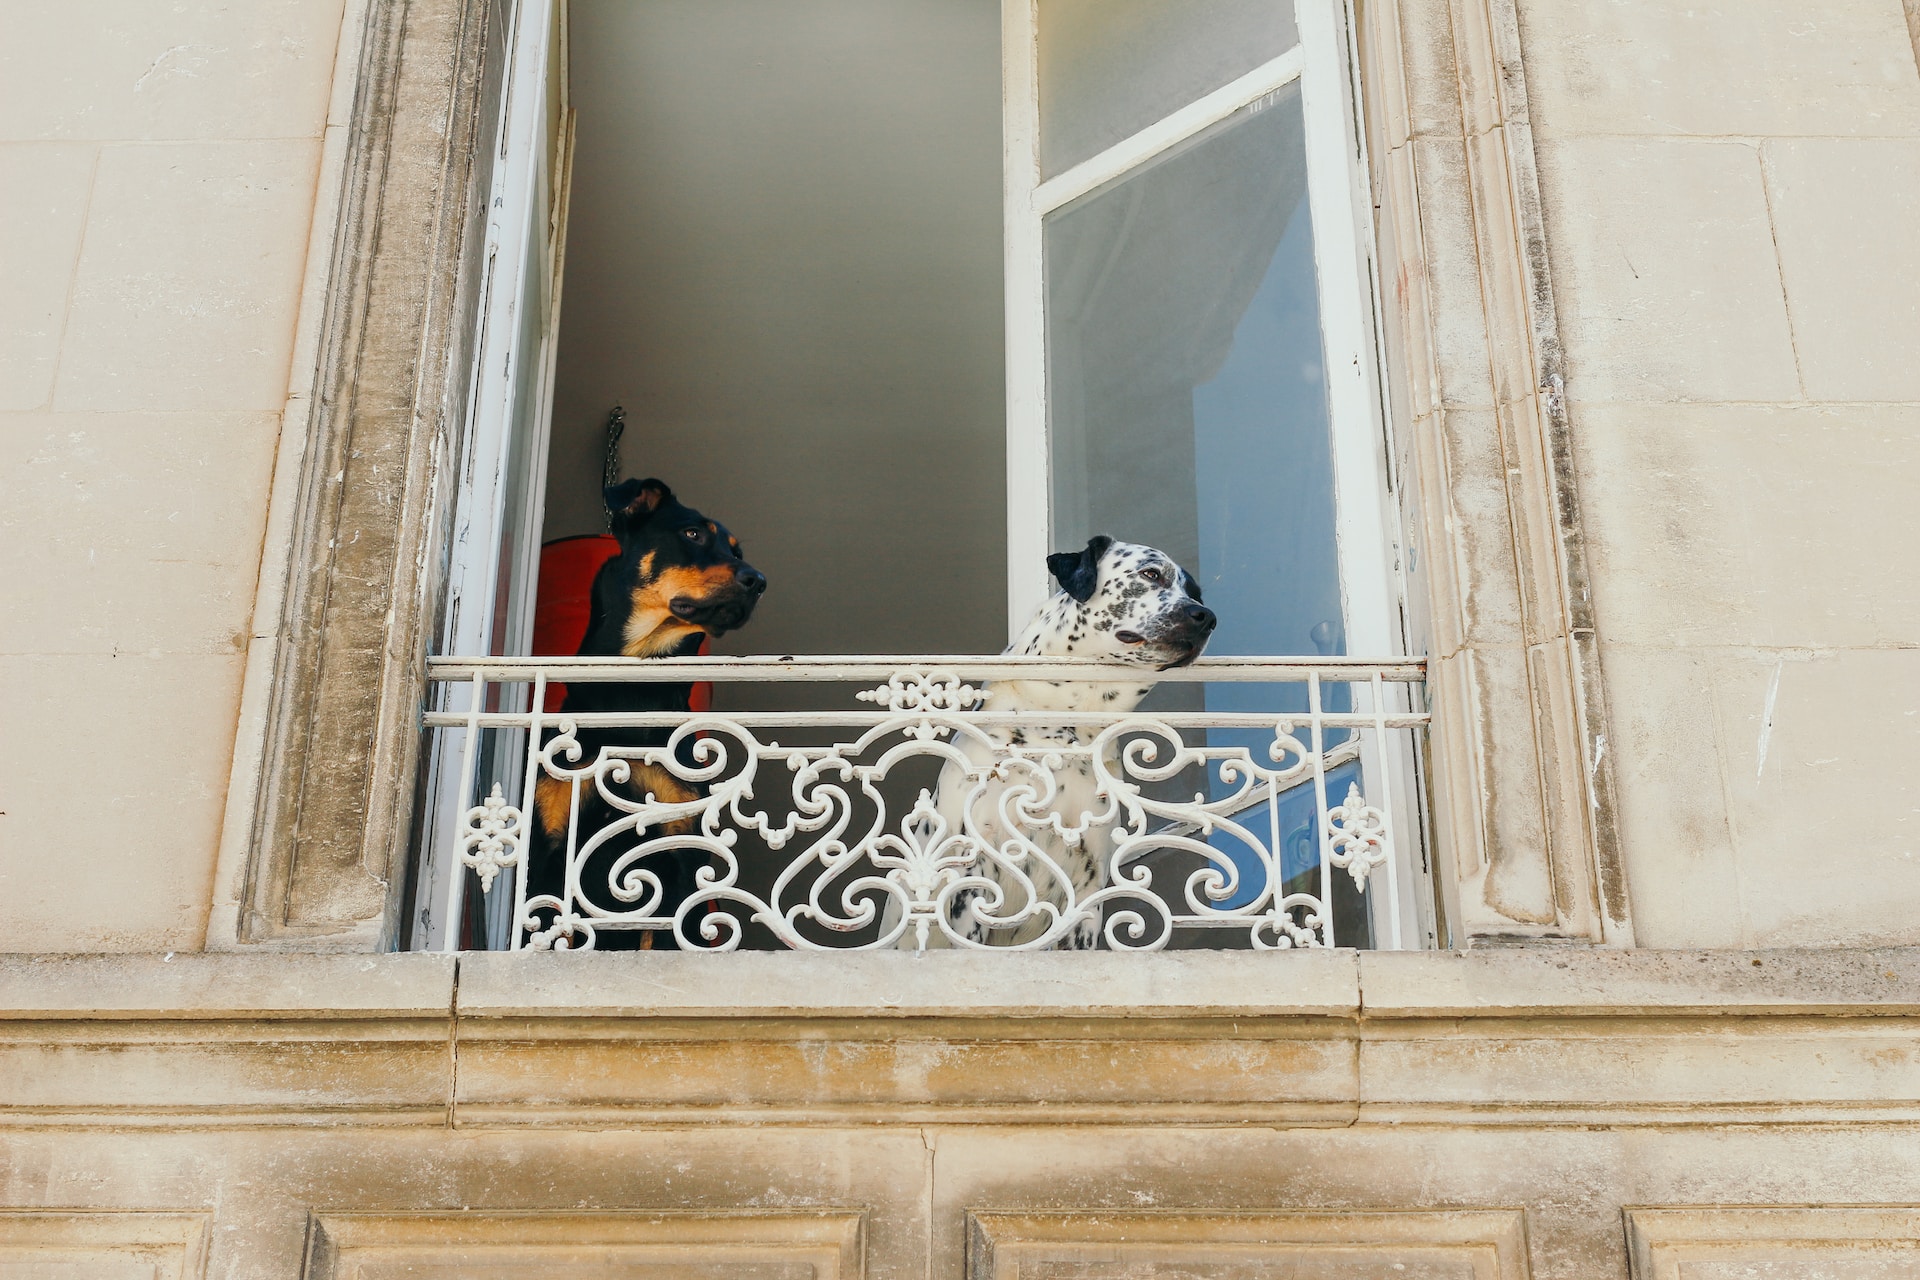 Two dogs in a window looking at the passing people down below.